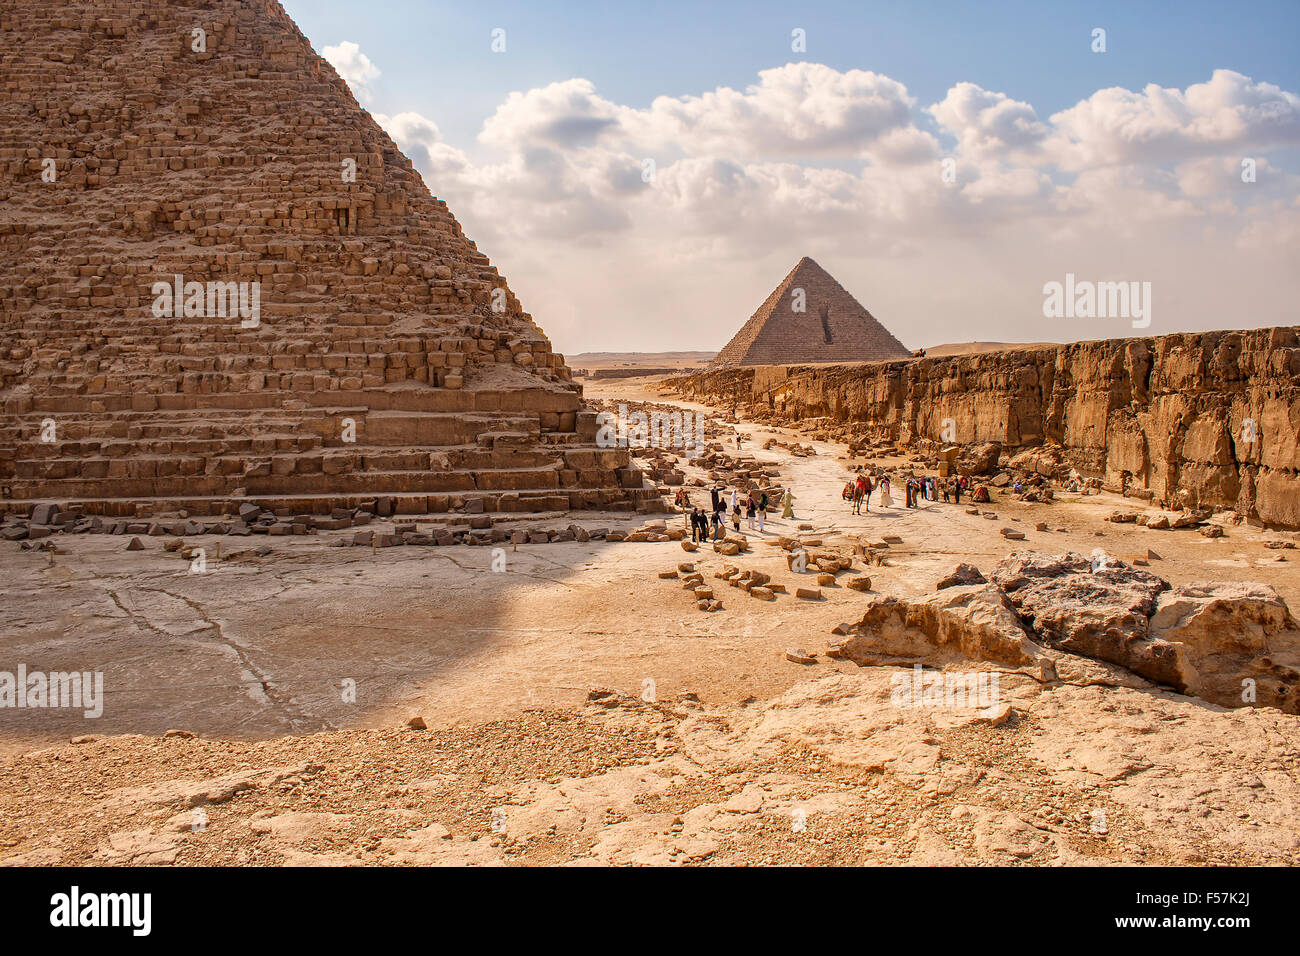 Image of the pyramids of Giza in Cairo, Egypt. Stock Photo